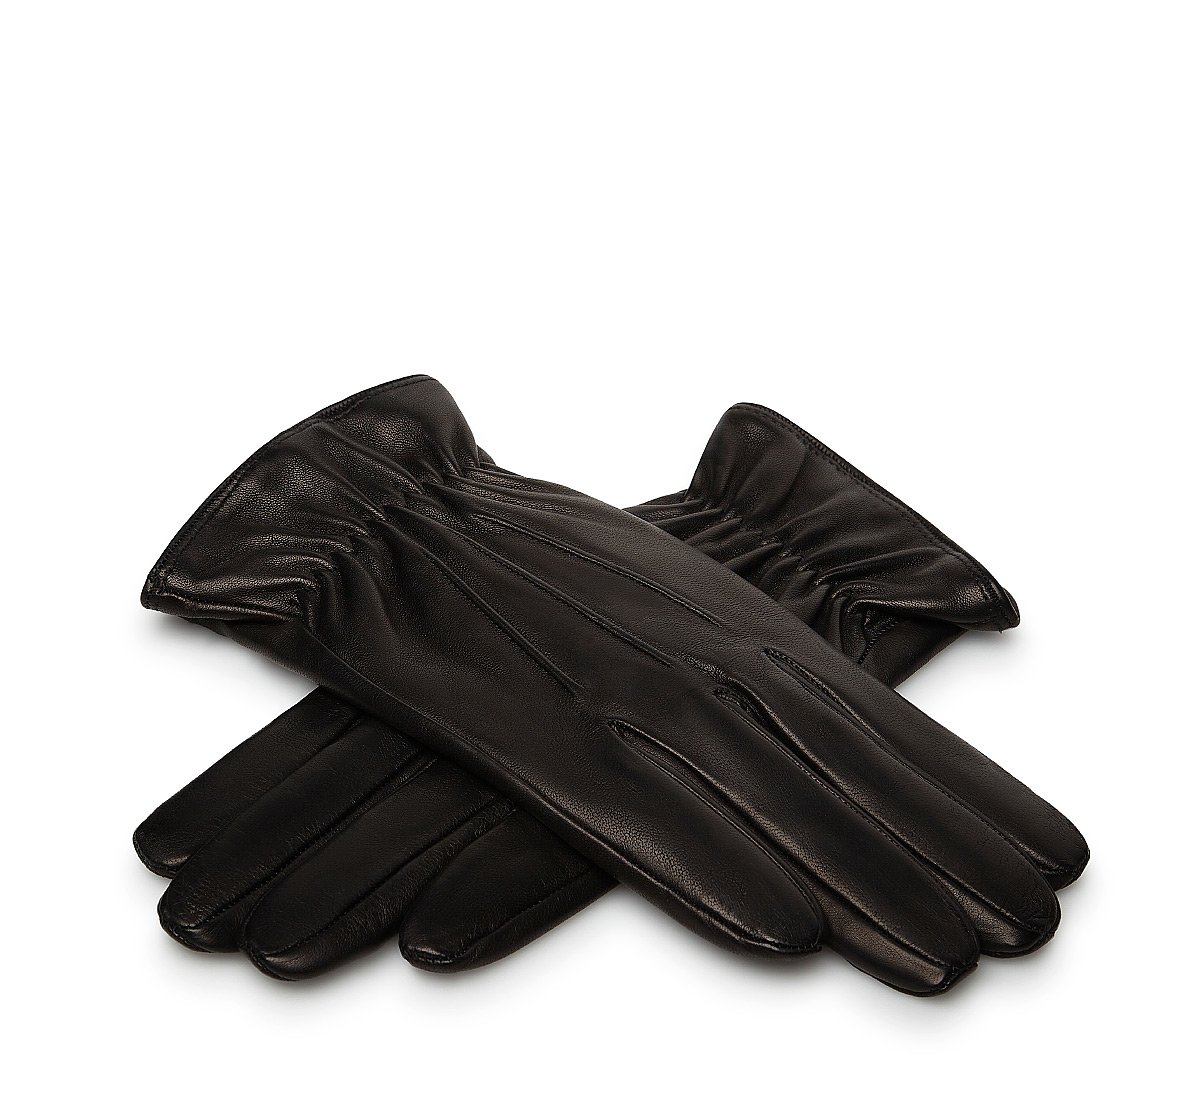 Black leather gloves with elastic